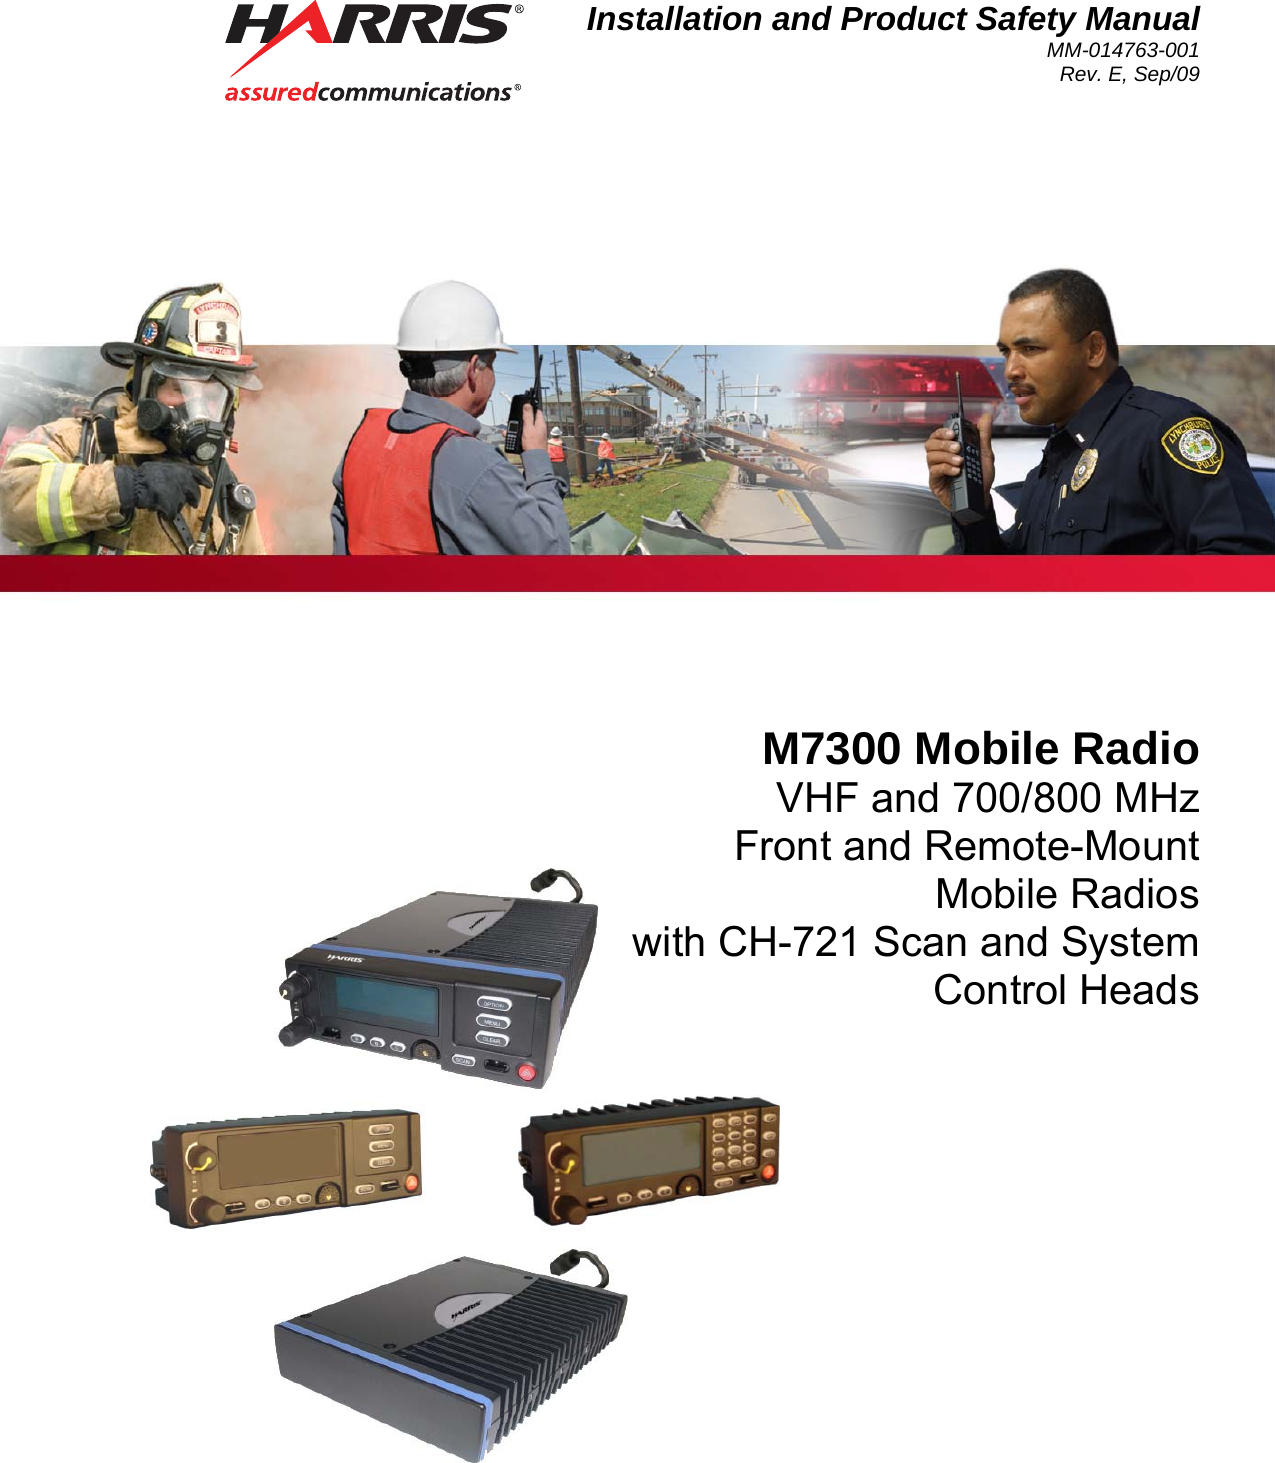 Installation and Product Safety Manual MM-014763-001 Rev. E, Sep/09 M7300 Mobile Radio VHF and 700/800 MHz Front and Remote-Mount Mobile Radios with CH-721 Scan and System Control Heads  